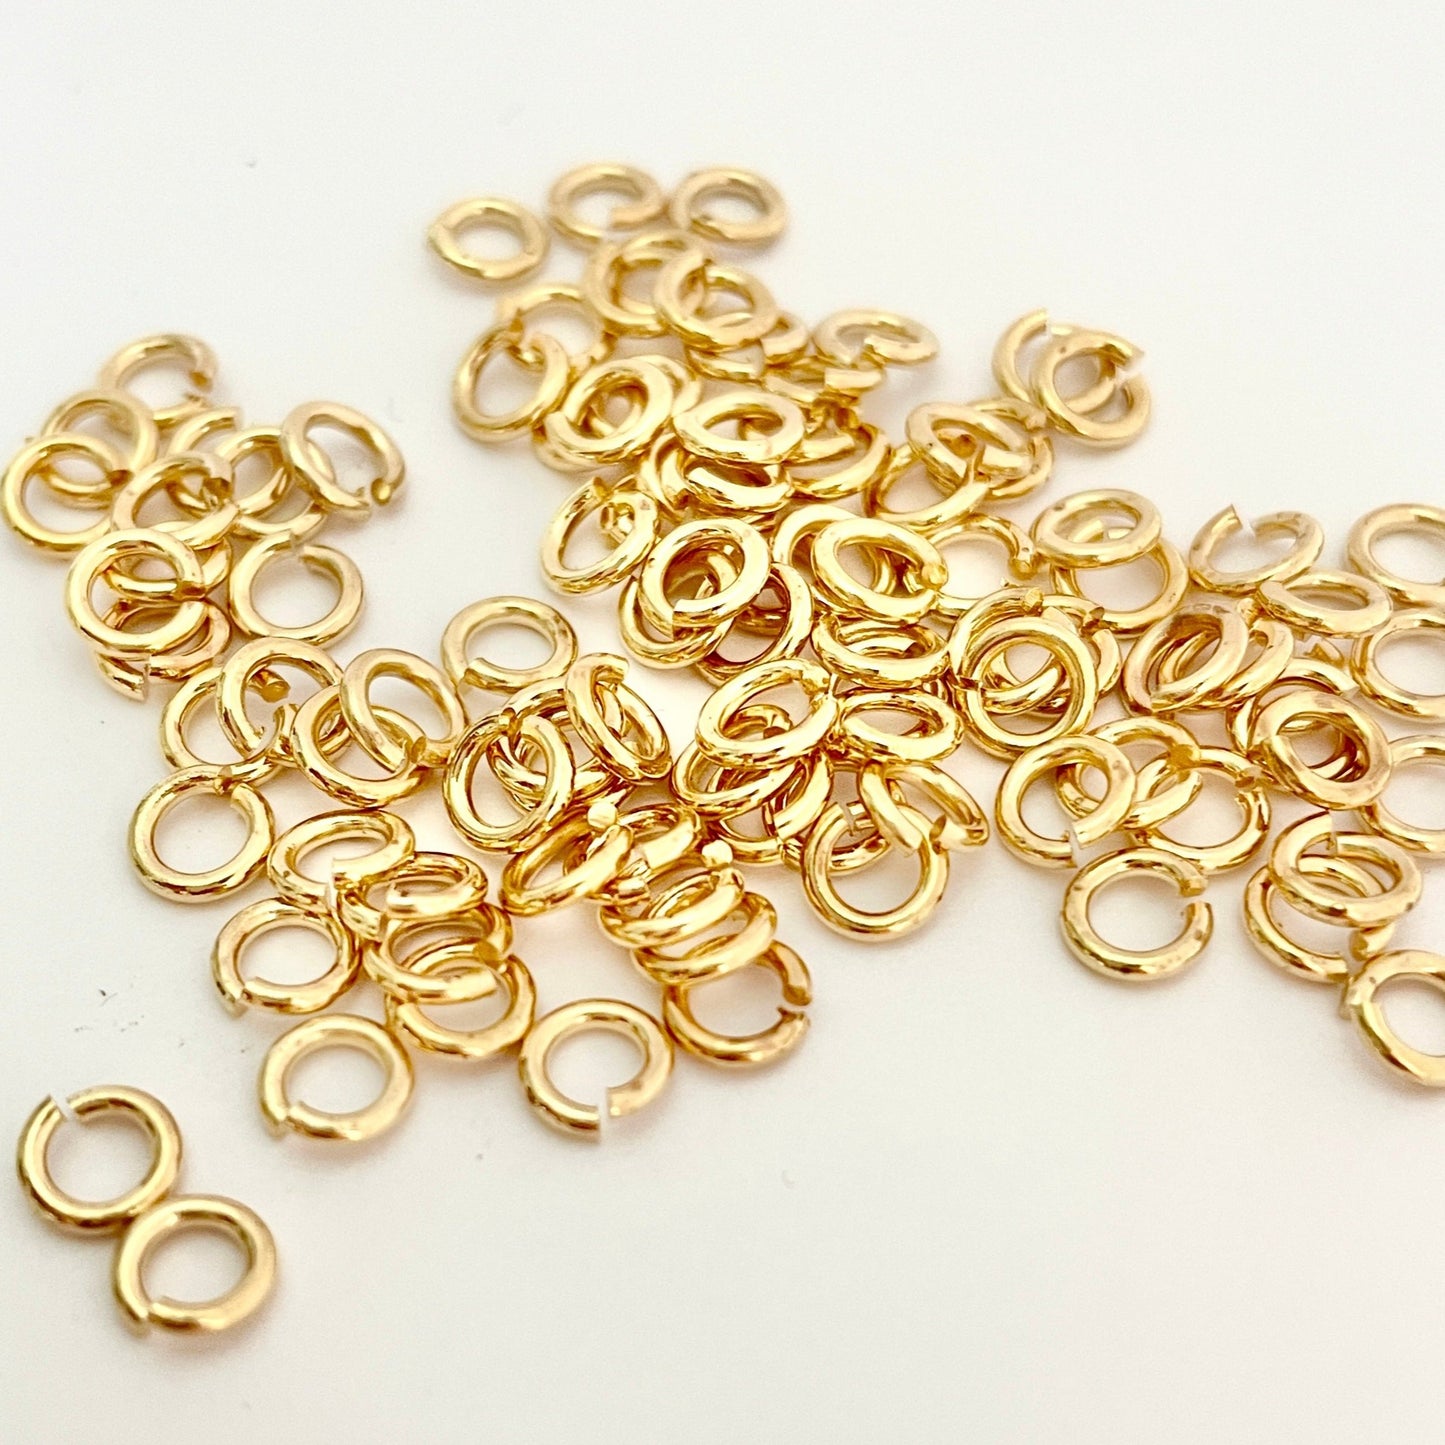 4mm Gold Plated Open Jump Rings (Approx 100 pieces)